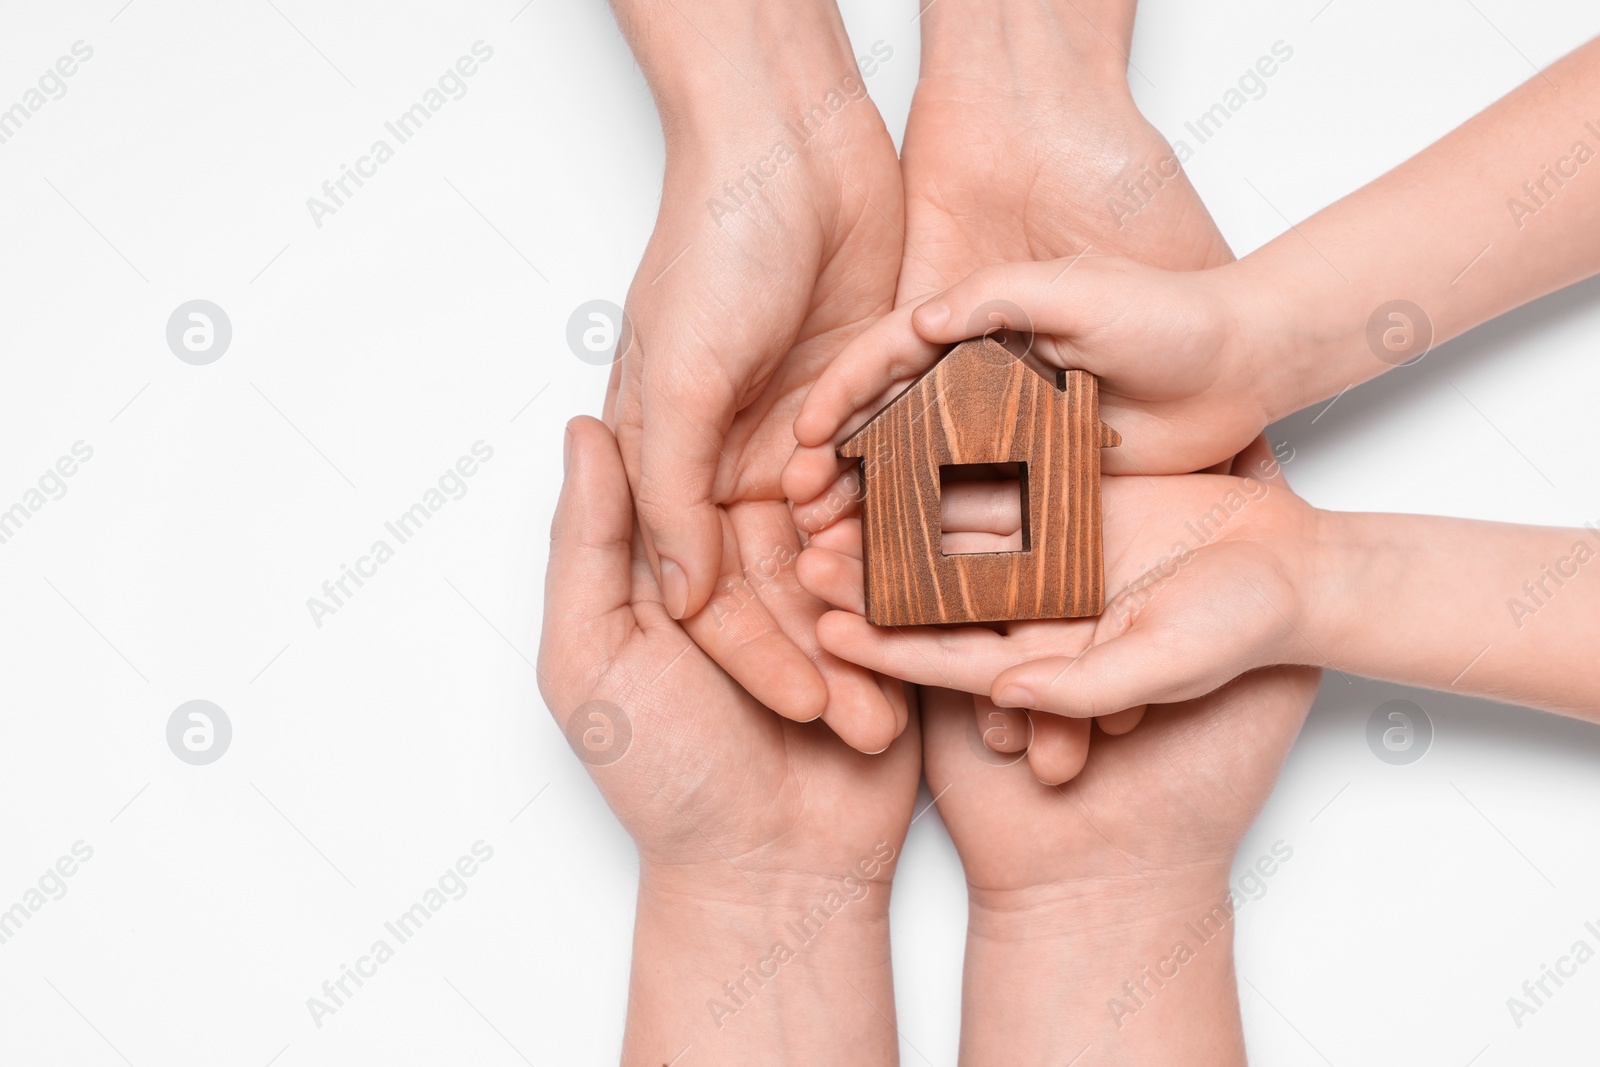 Photo of Home security concept. Family holding house model on white background, top view with space for text